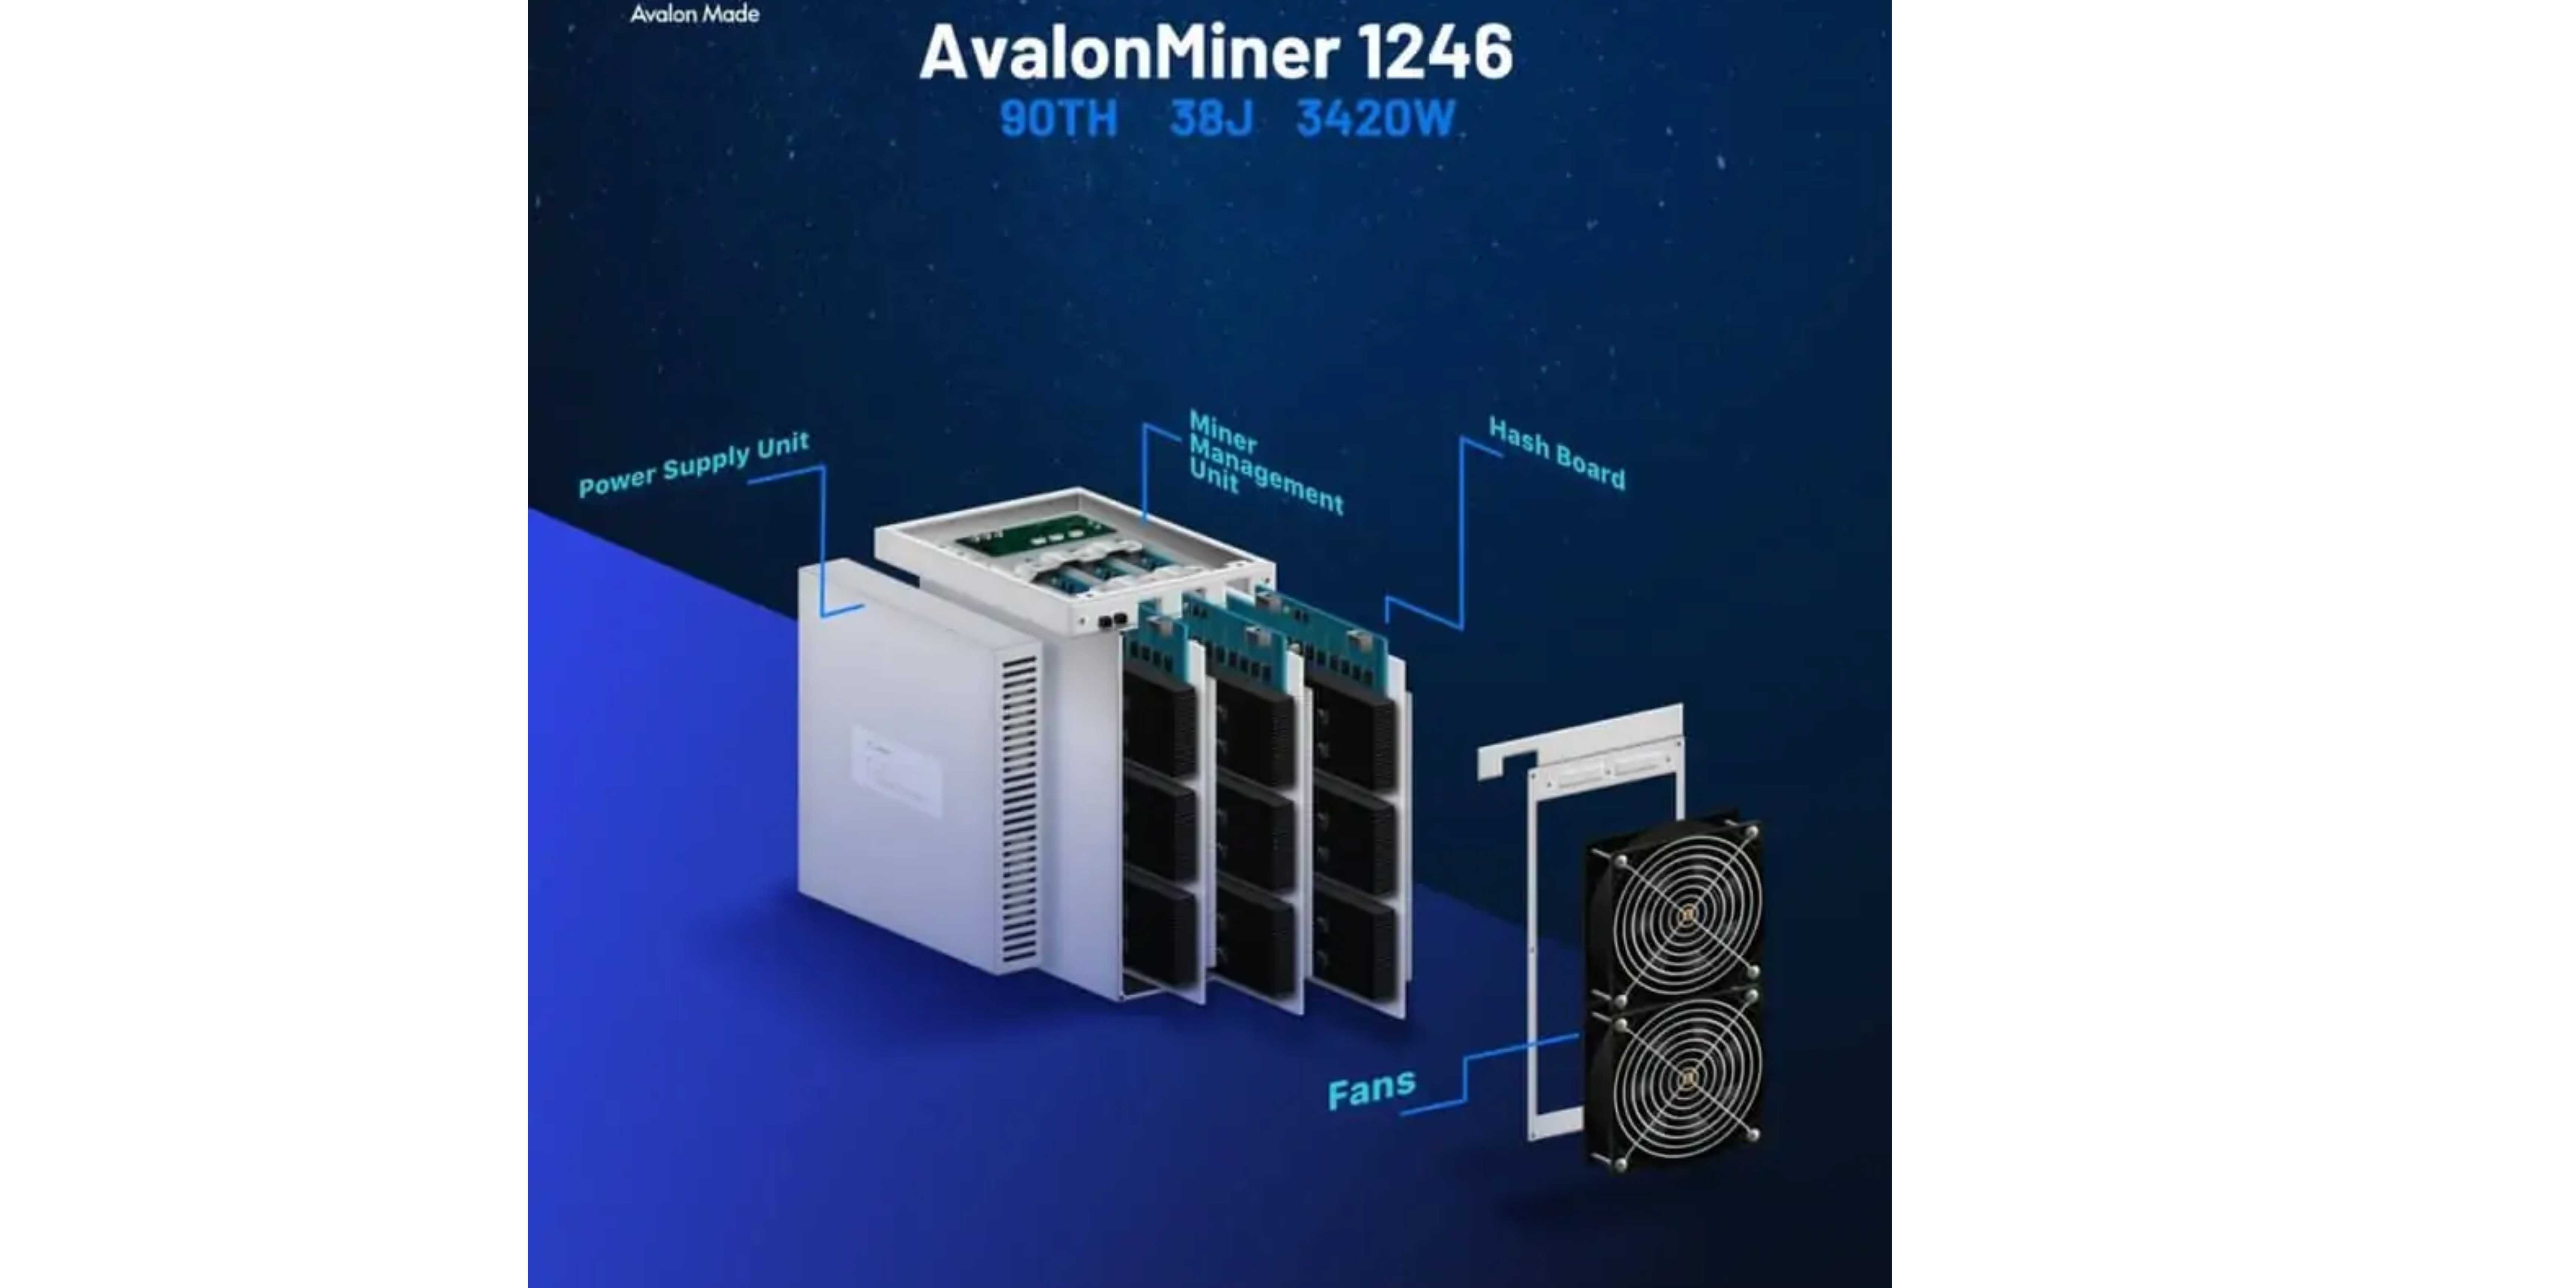 Need To Upgrade Your BTC Mining? Here's The Canaan Avalonminer 1246 Mining Hashrate Review